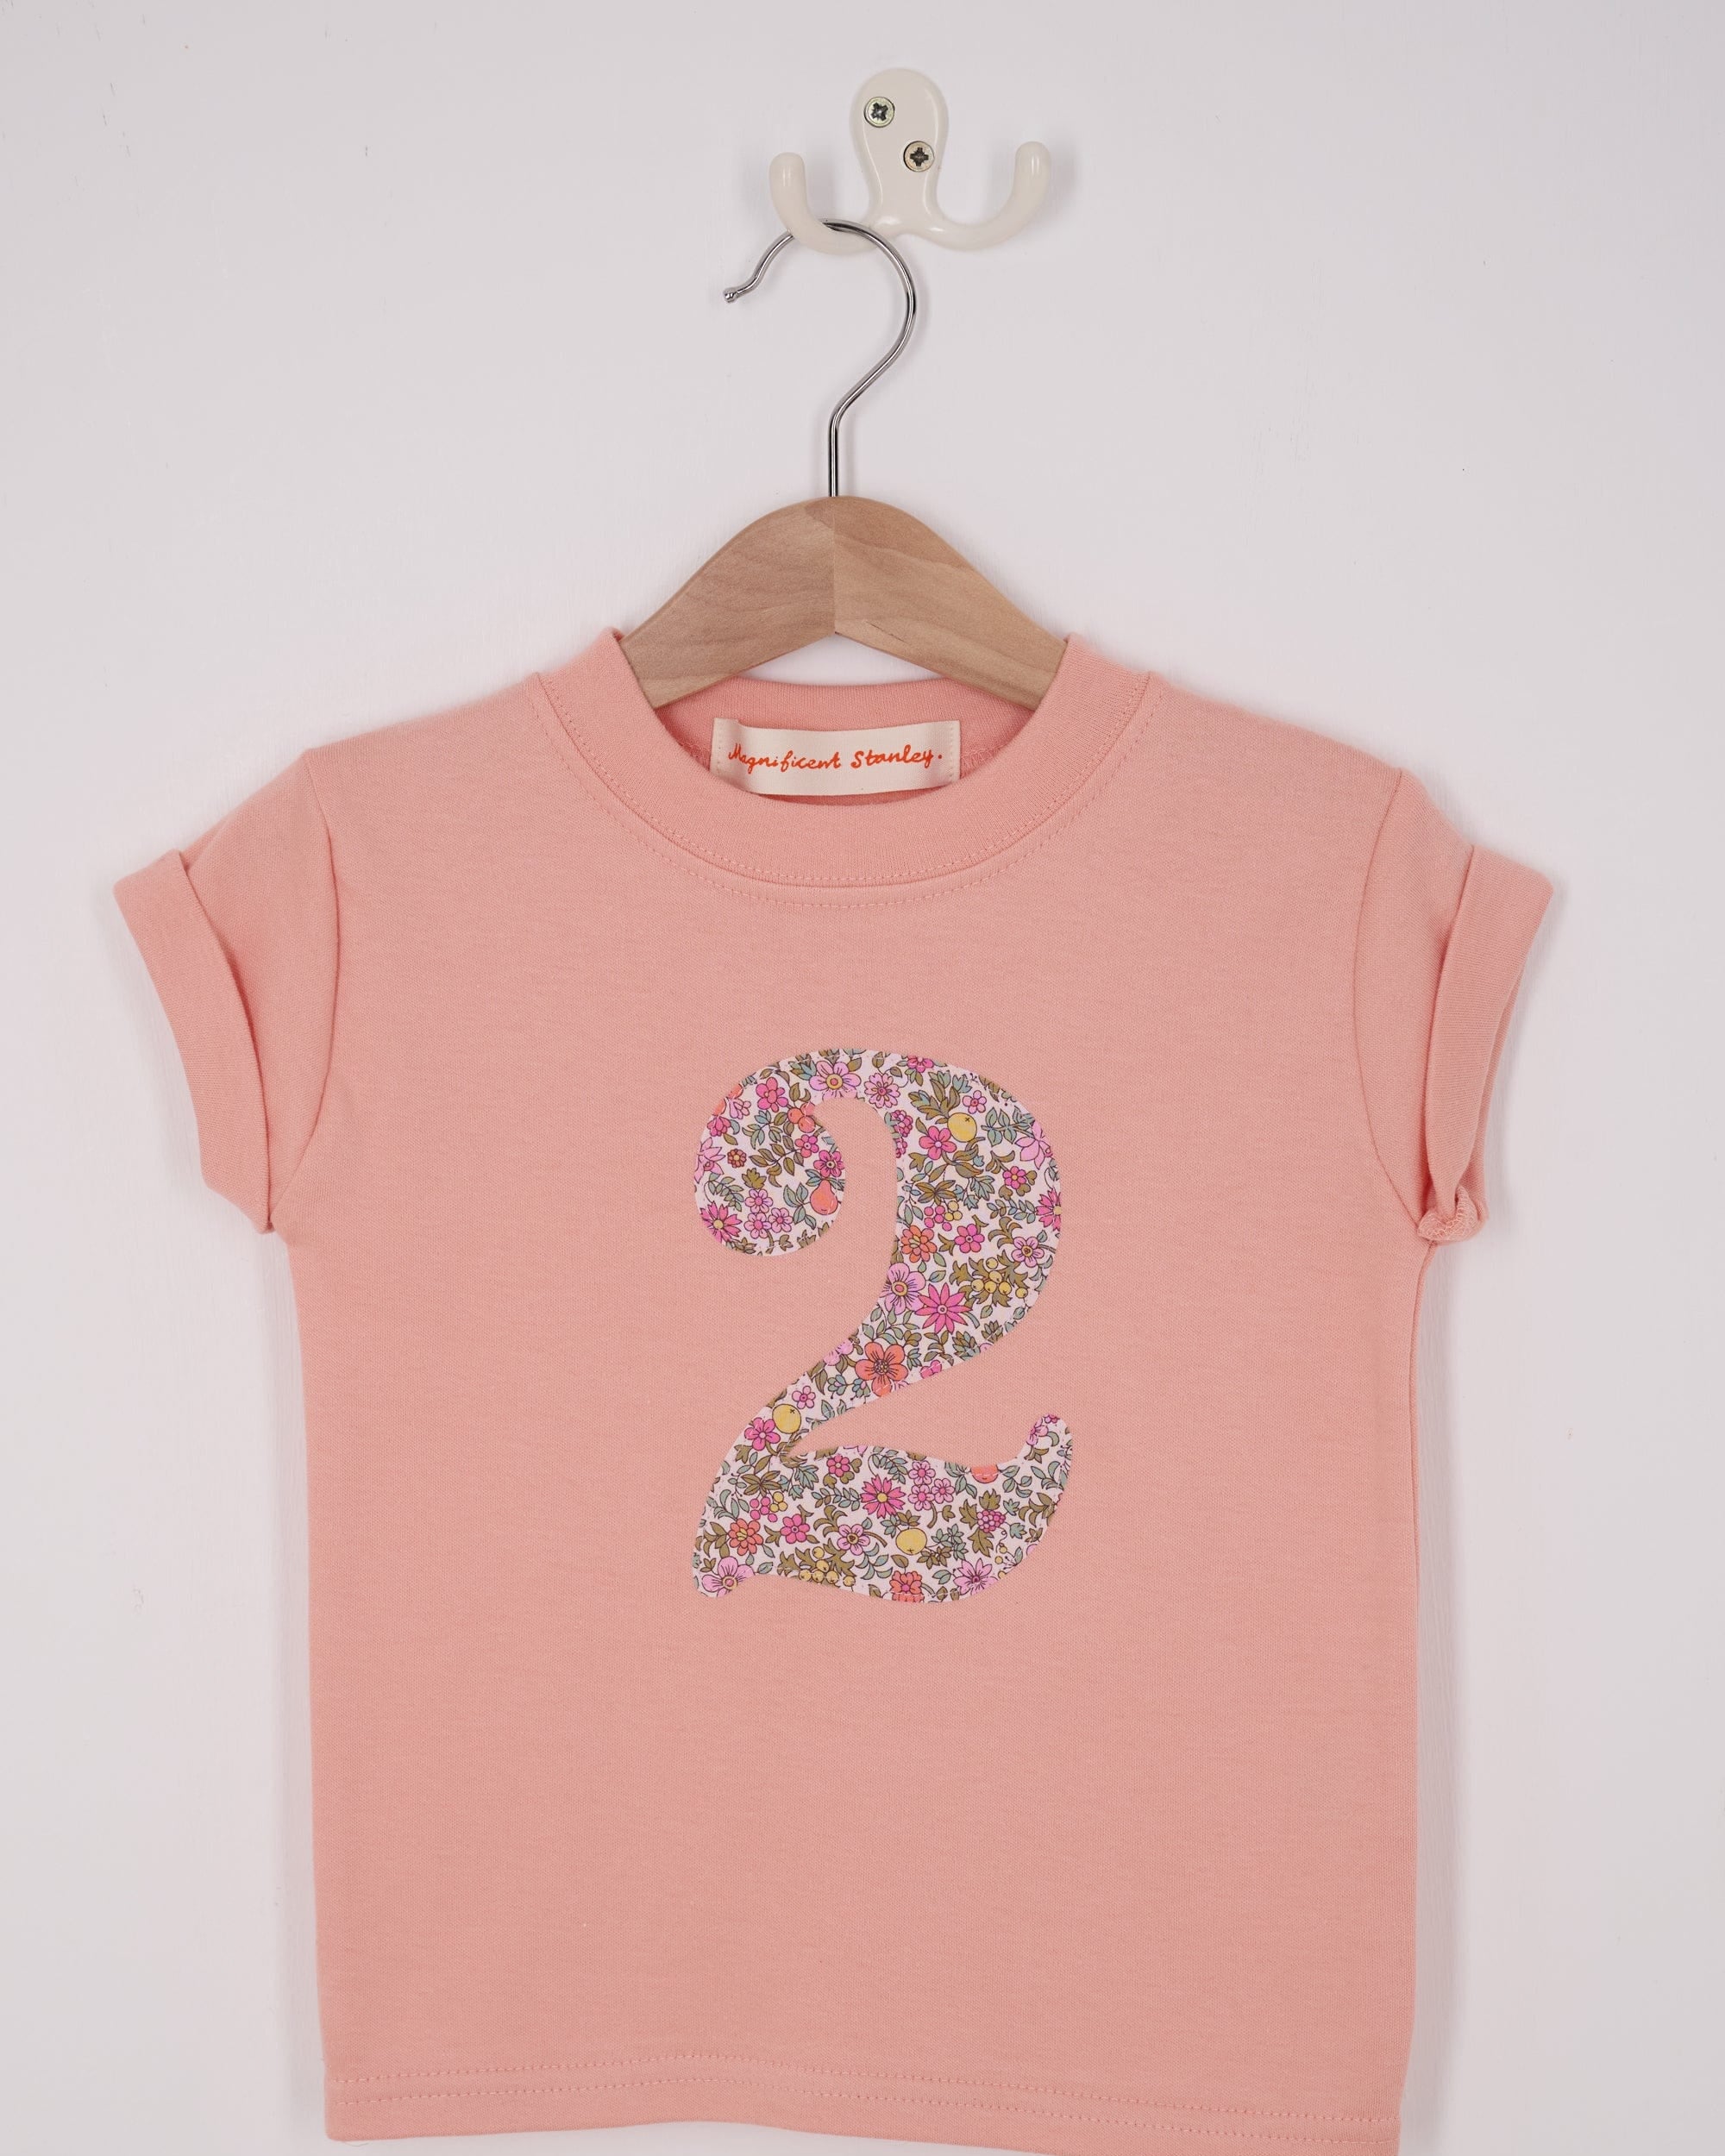 Magnificent Stanley Tee Number Dusty Pink T-Shirt in Fruit Punch Liberty Print